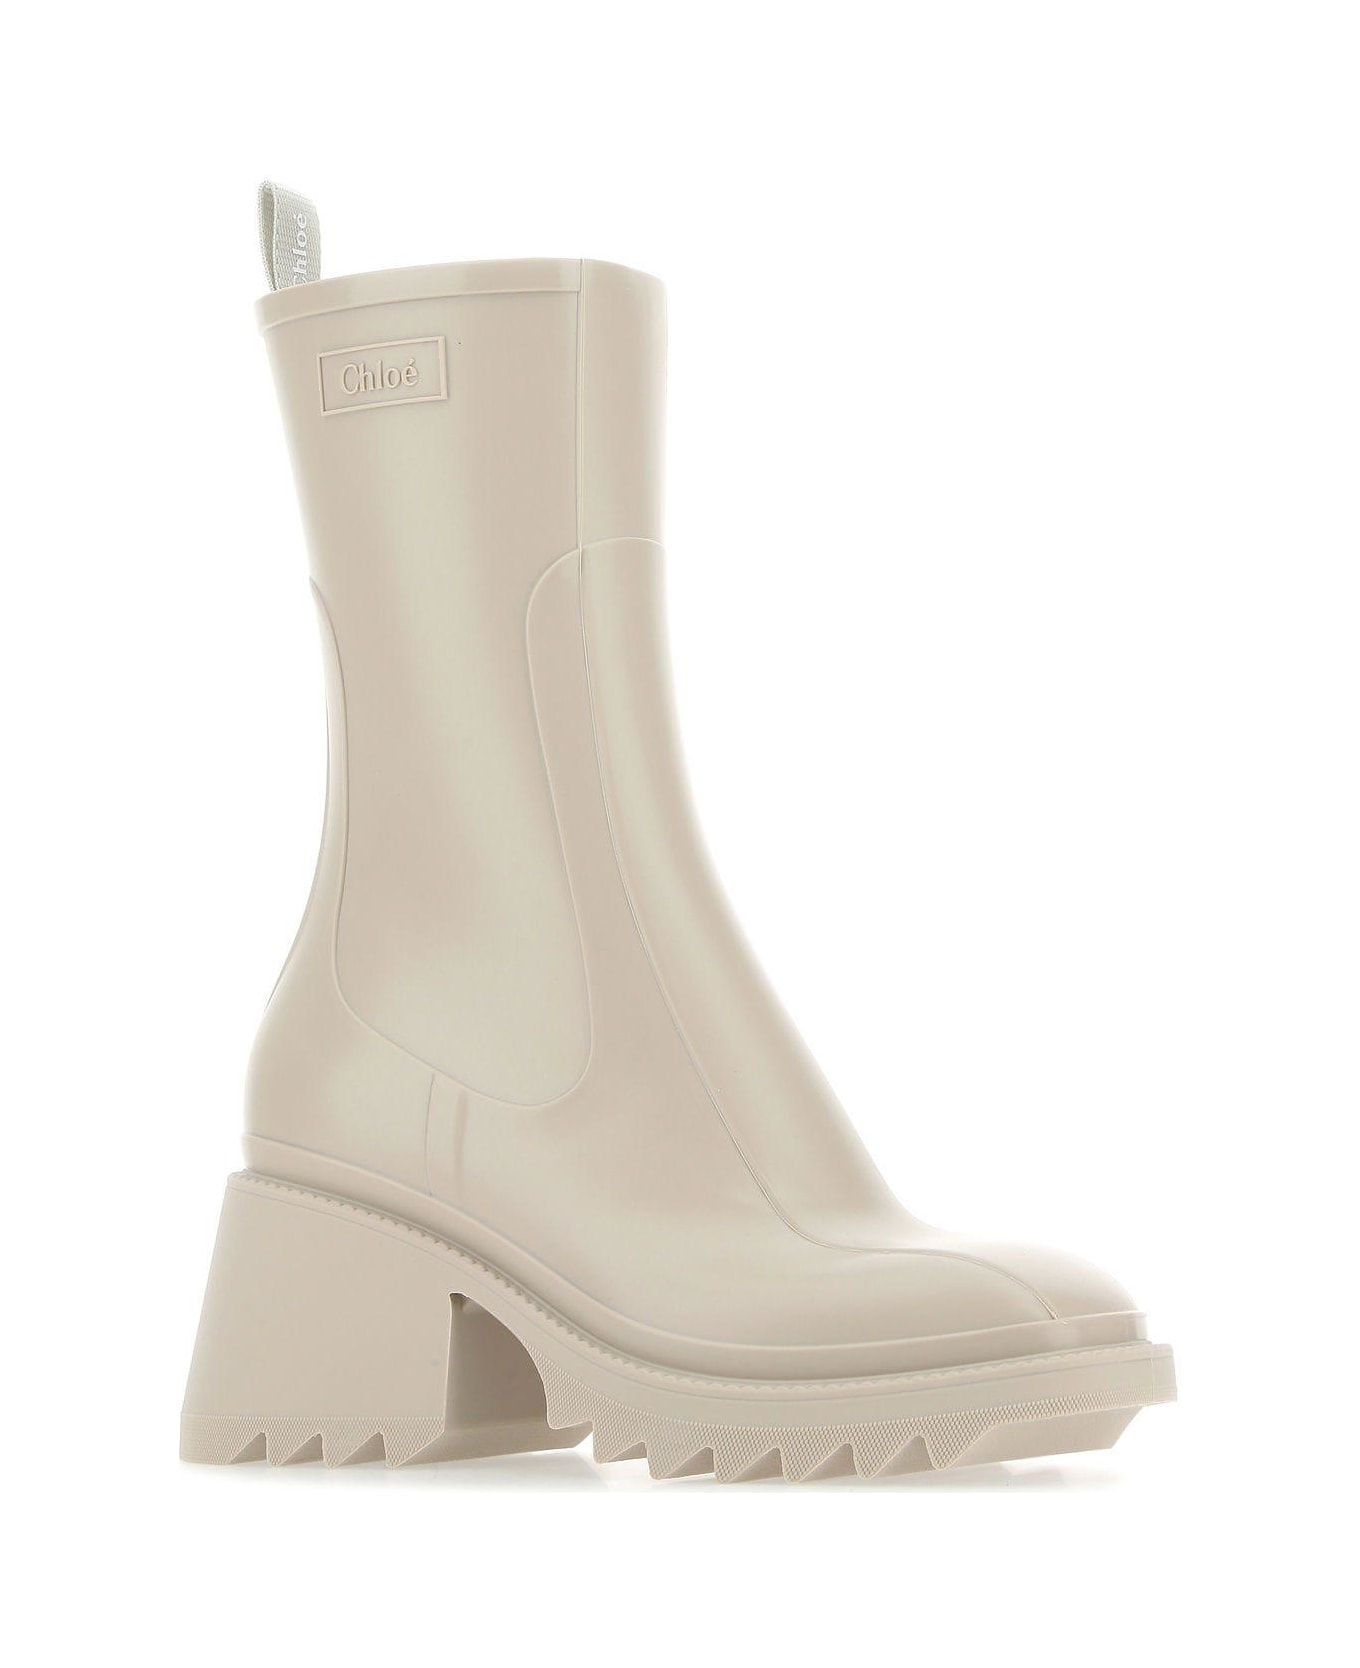 Chloé Dove Grey Rubber Ankle Boots - Nomad beige